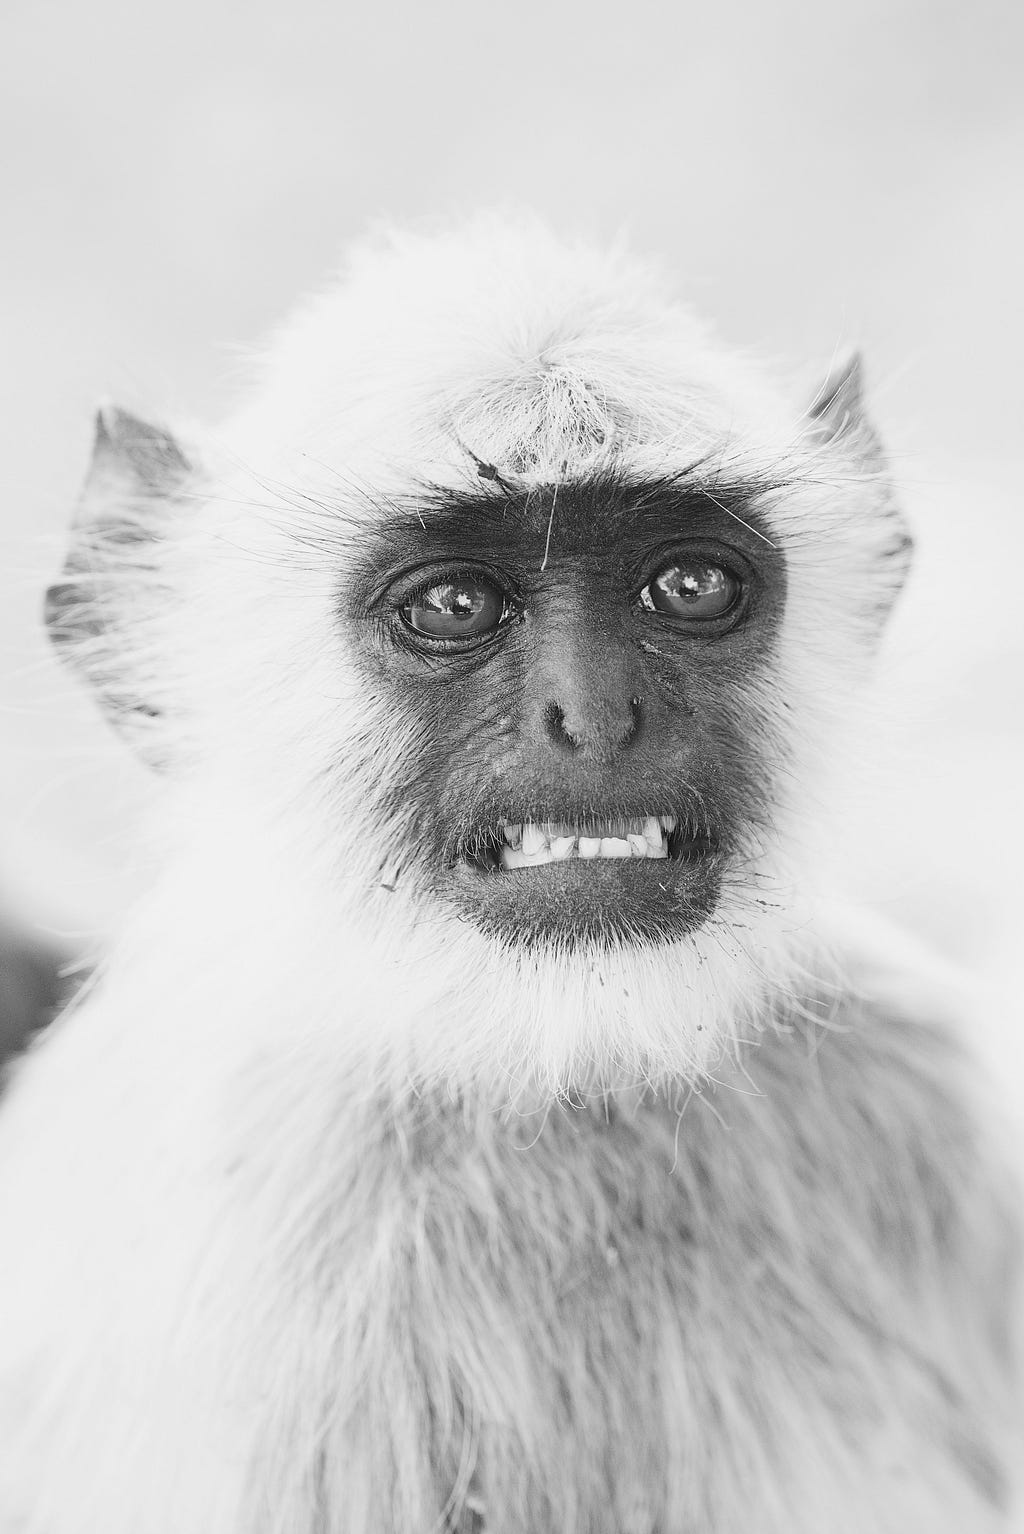 A monkey with a sort of embarrassed facial expression